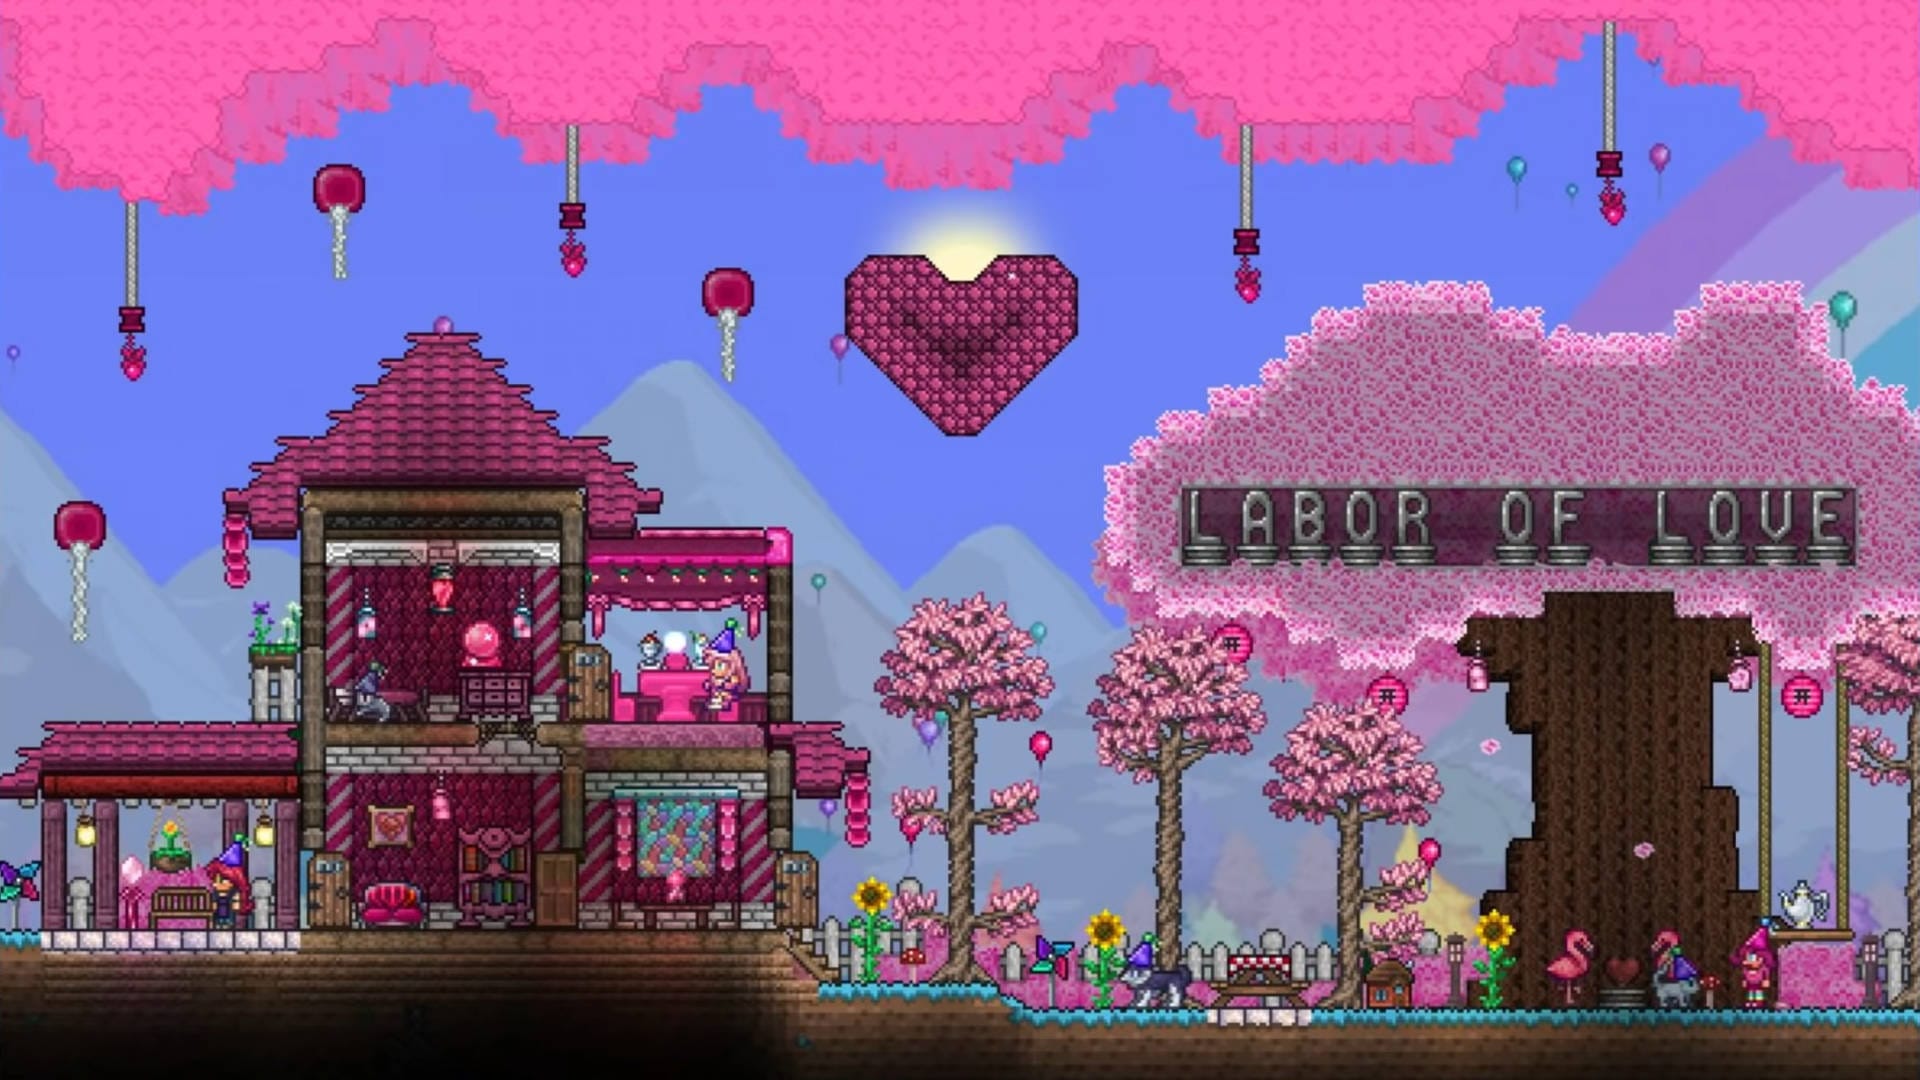 Since we already did a collaboration with Terraria once before